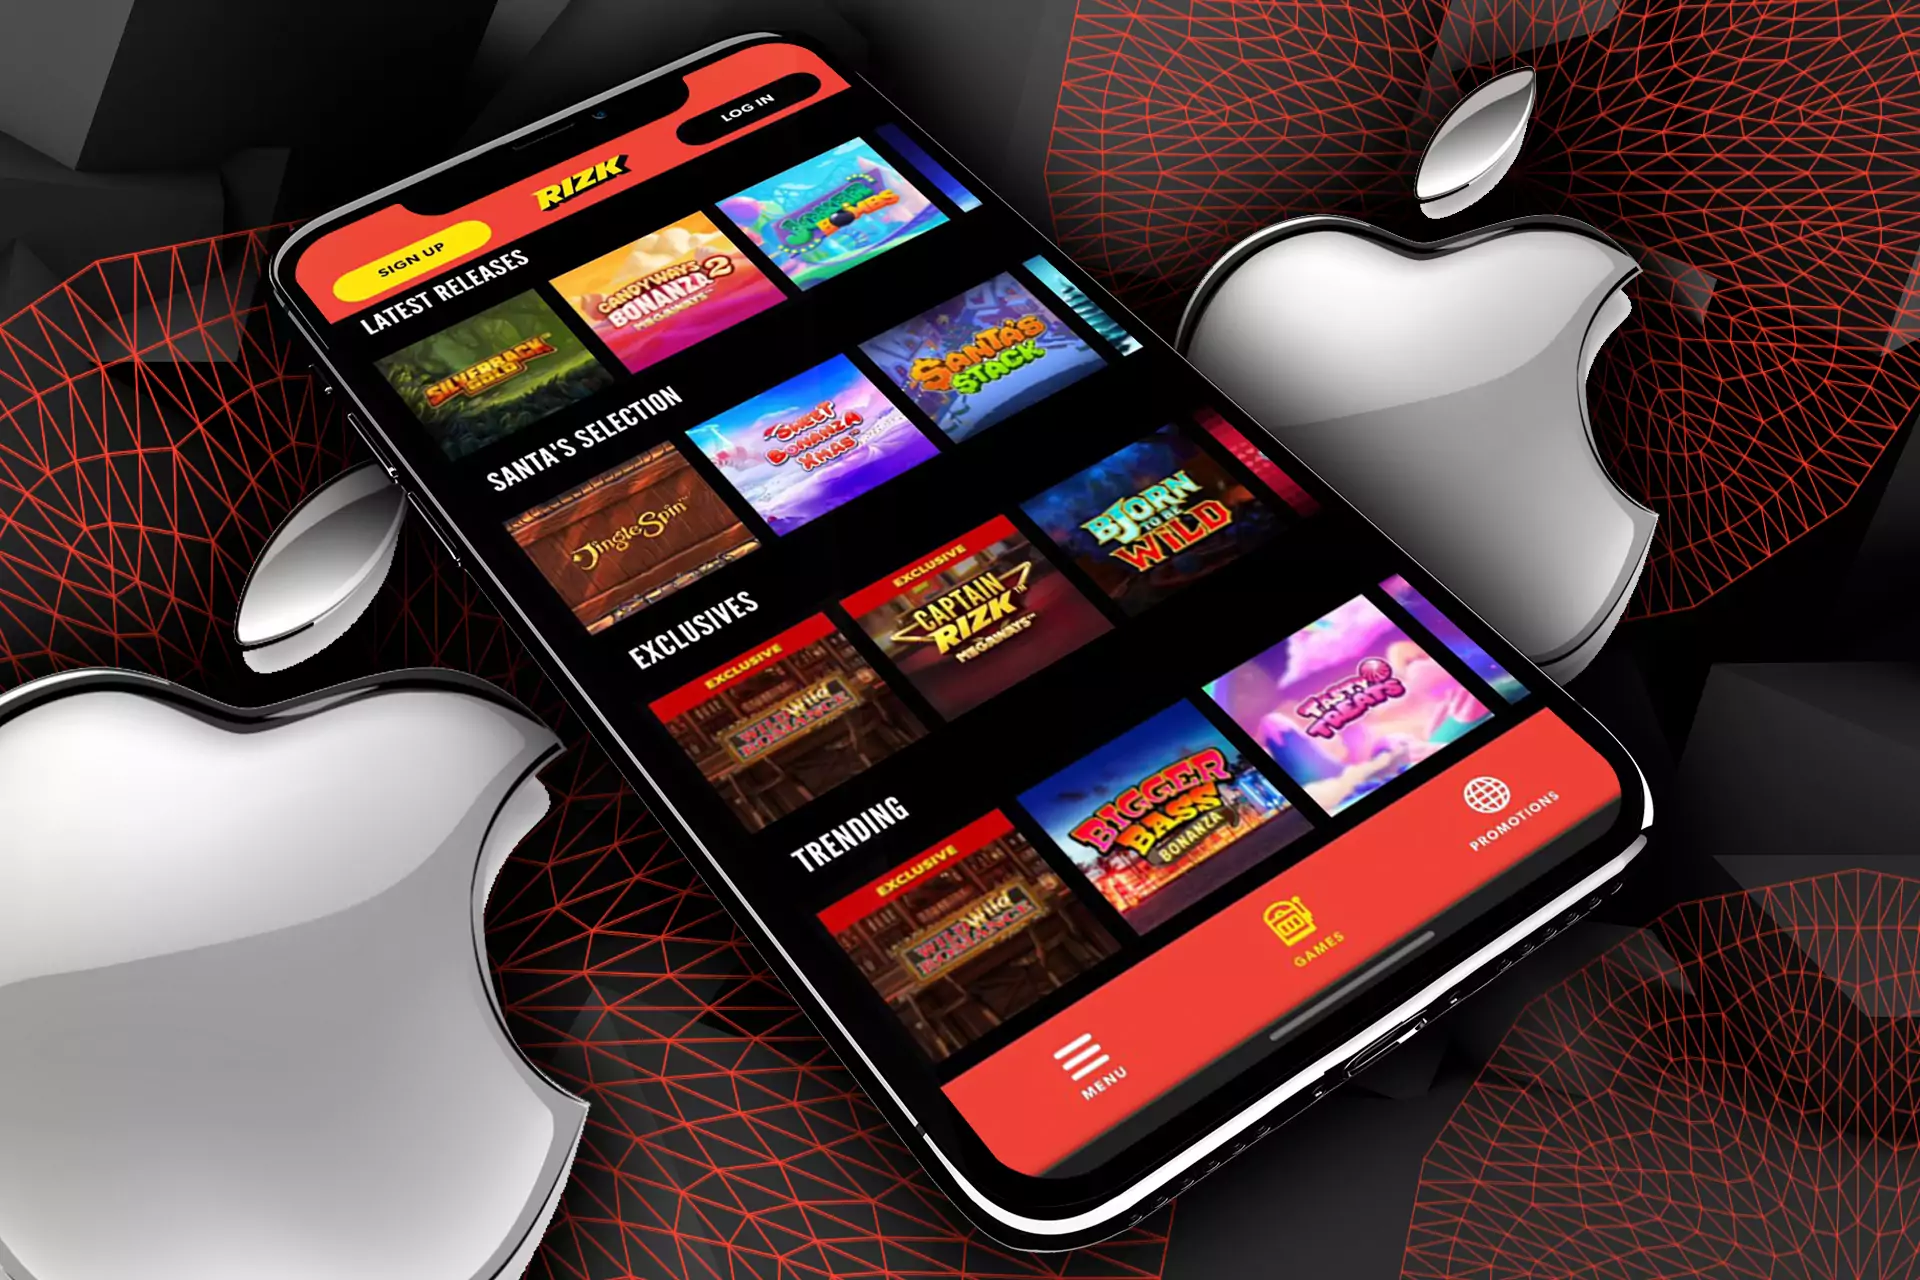 The iOS version of the Rizk Casino app can be downloaded from the App Store.